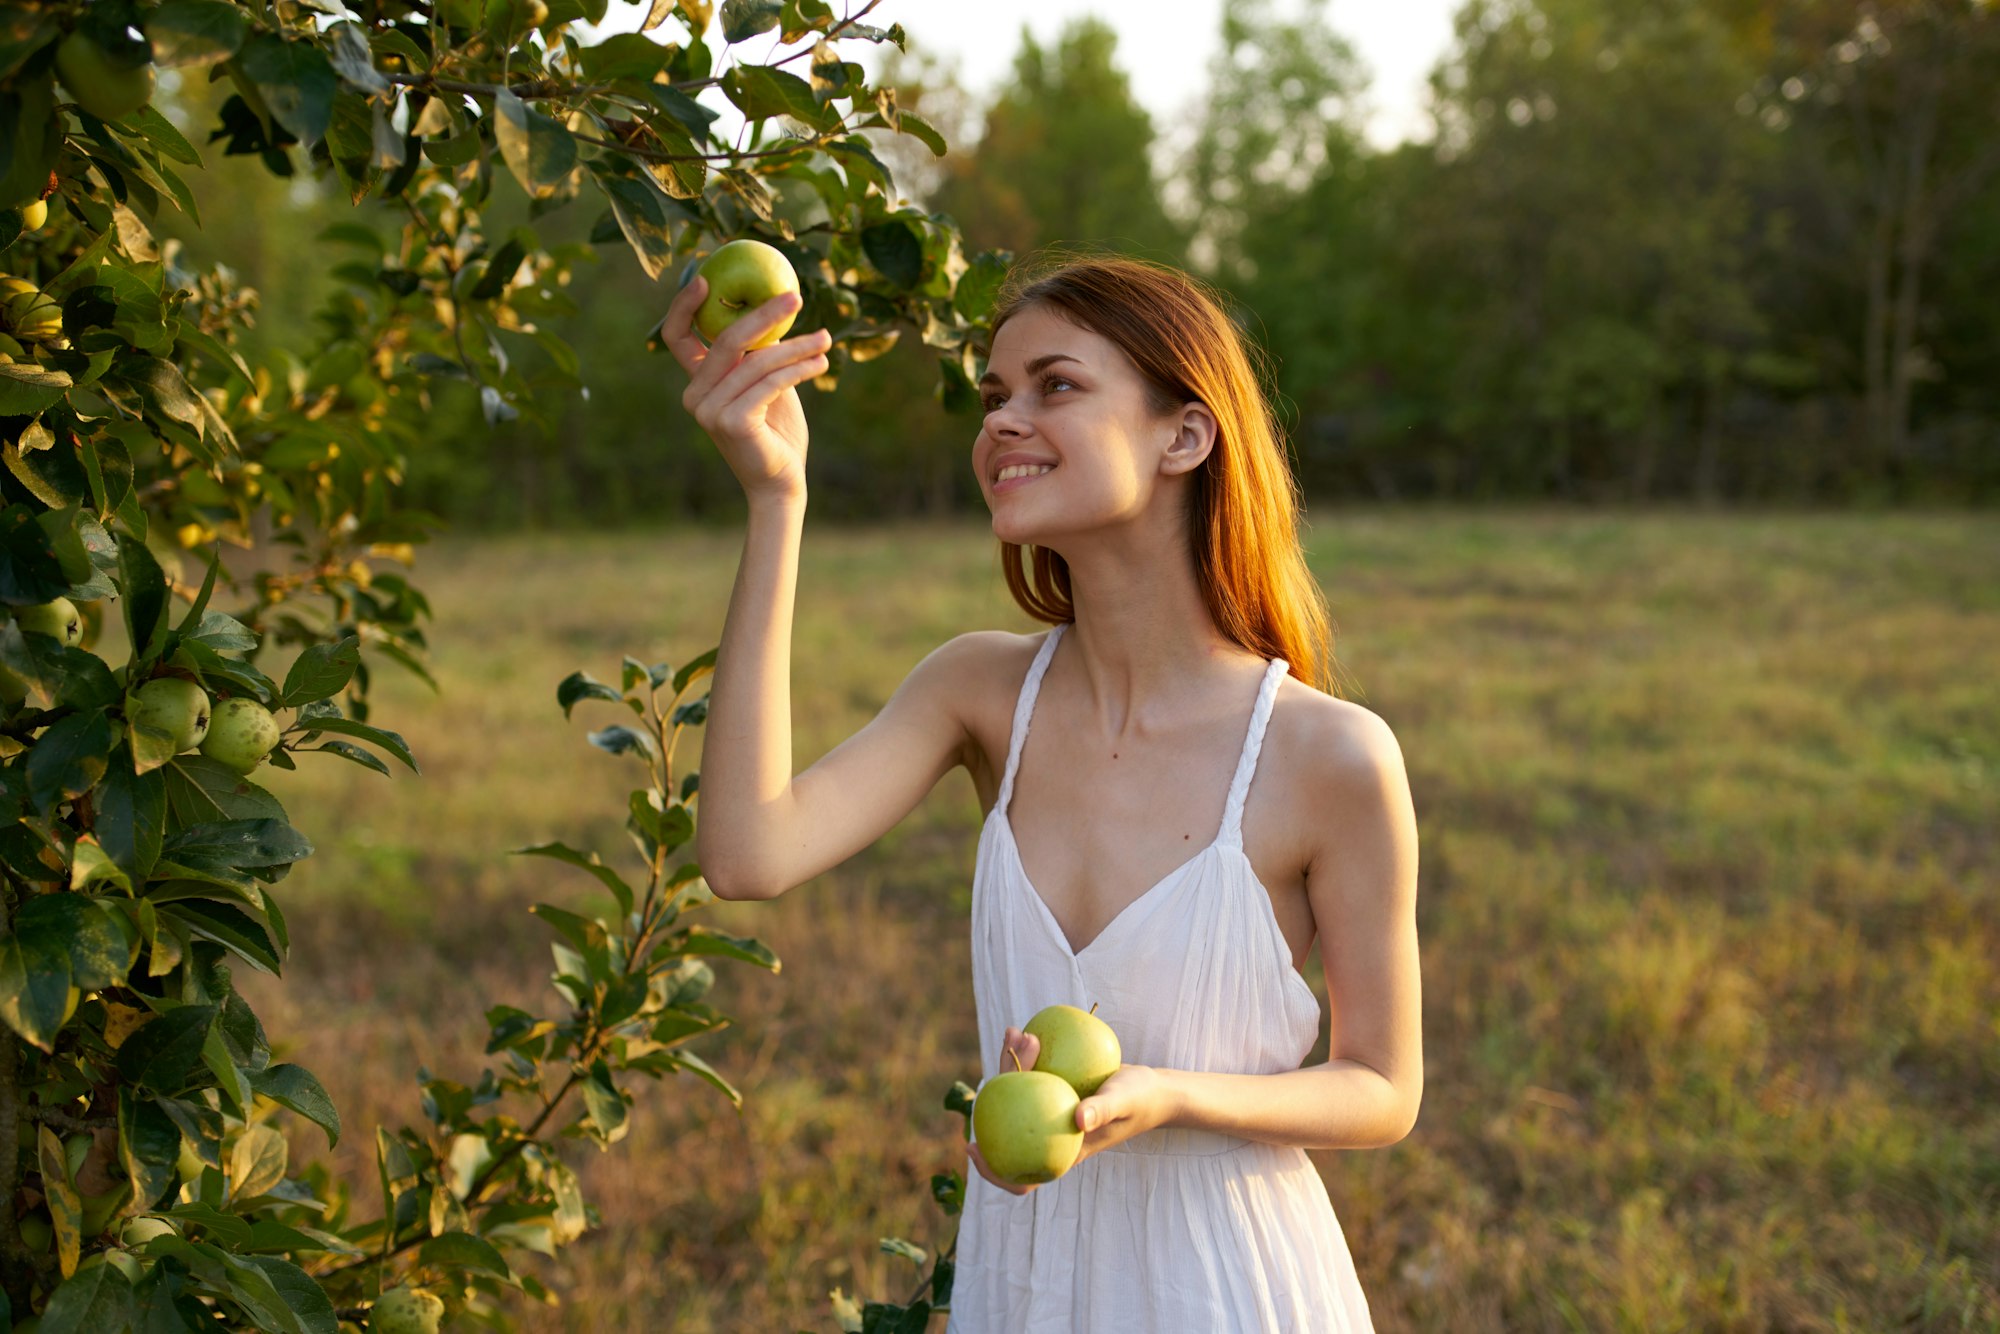 Woman in a white dress in a field with apples in her hands